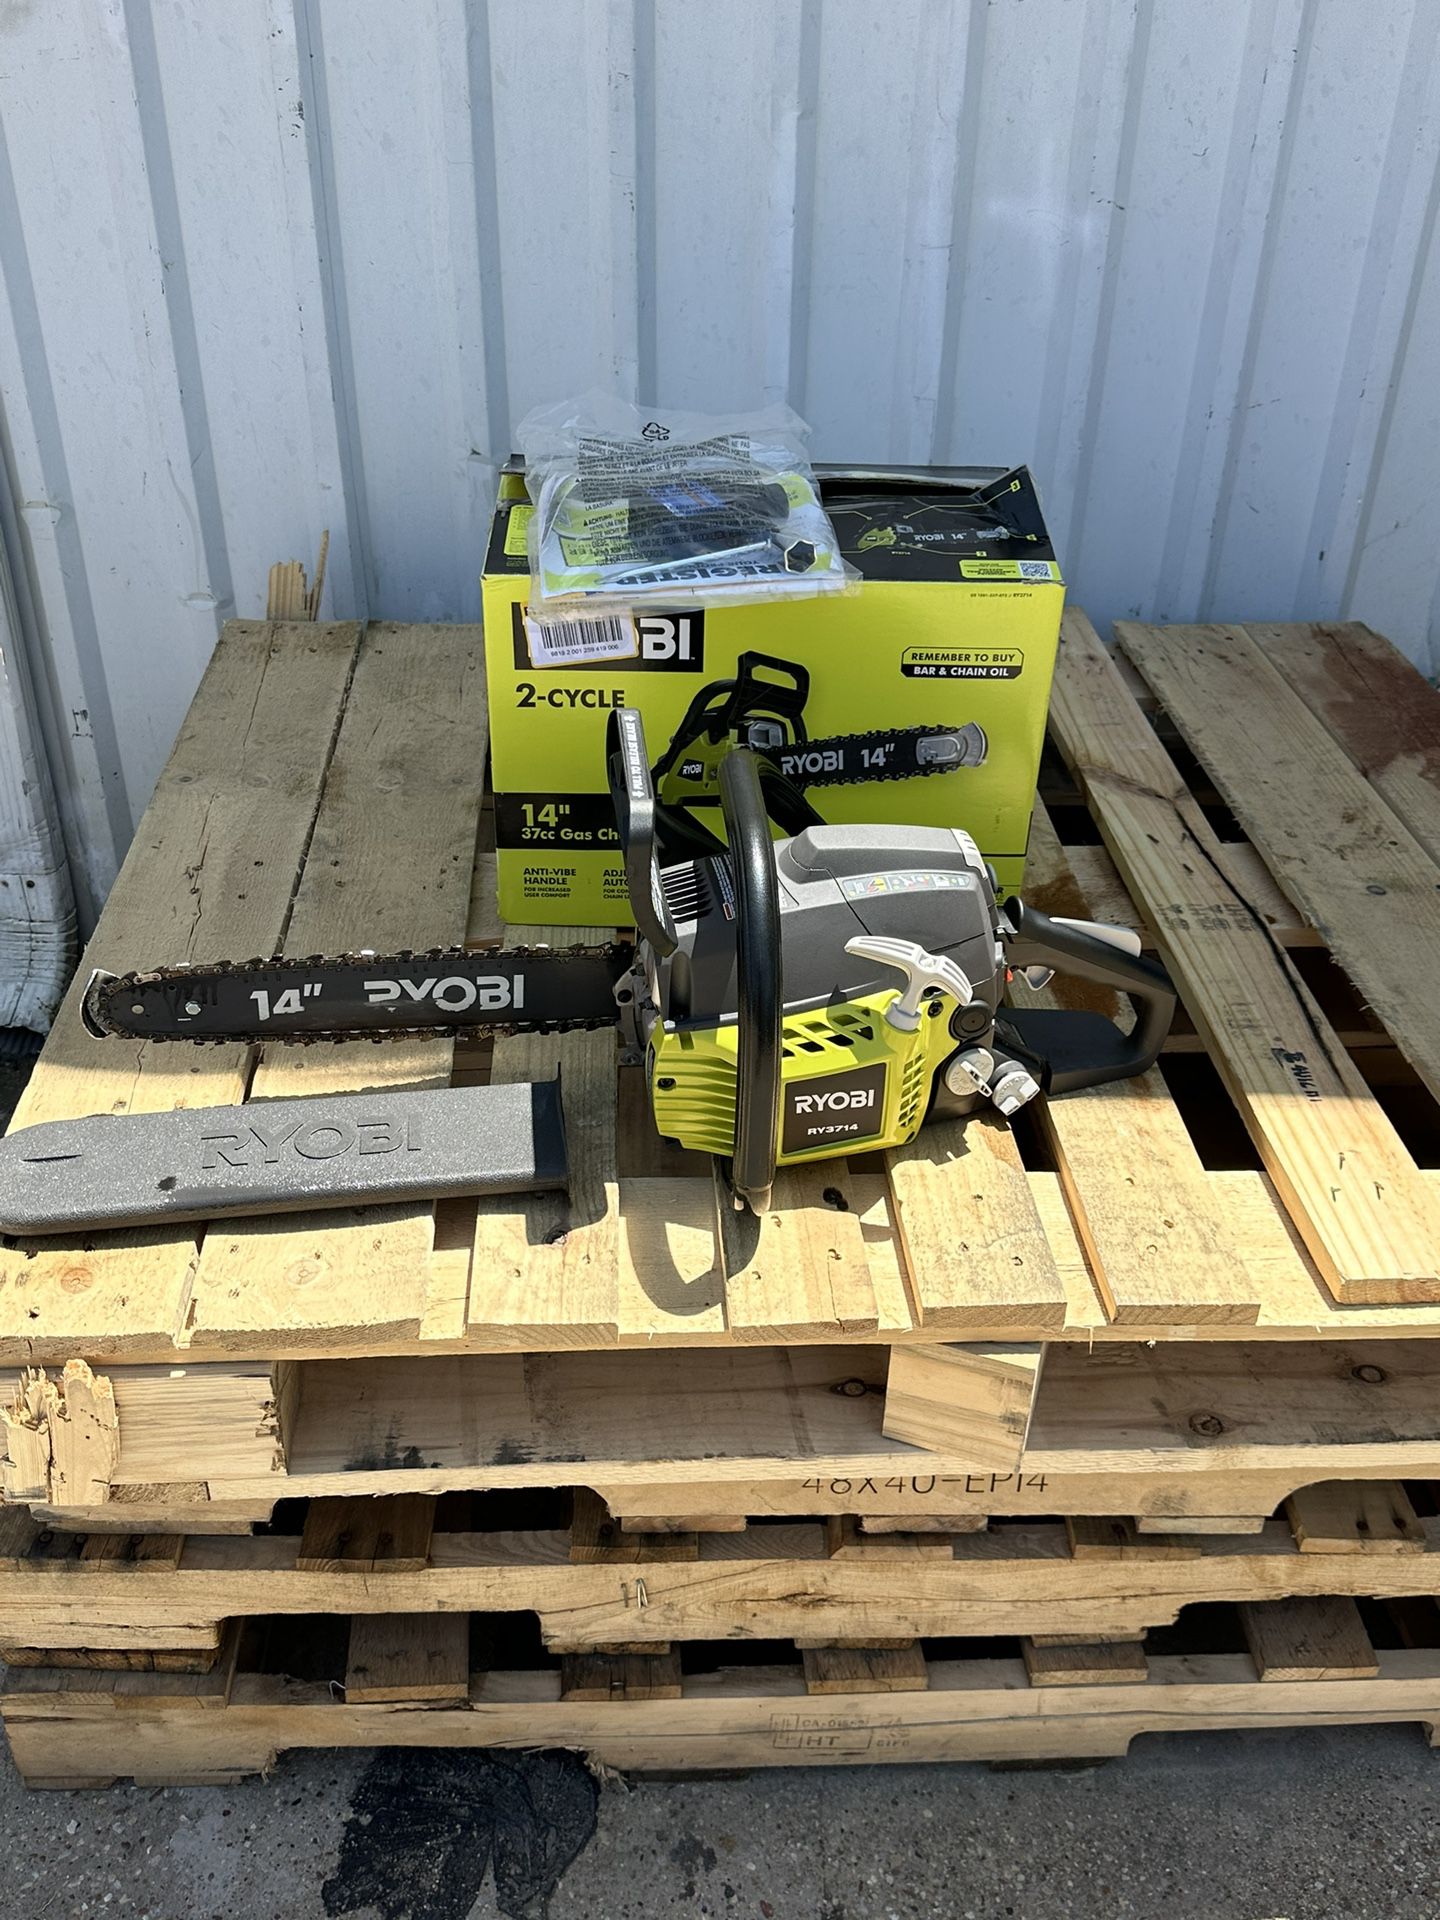 RYOBI 14 in. 37cc 2-Cycle Gas Chainsaw USED Perfect condition perfect work Used $100